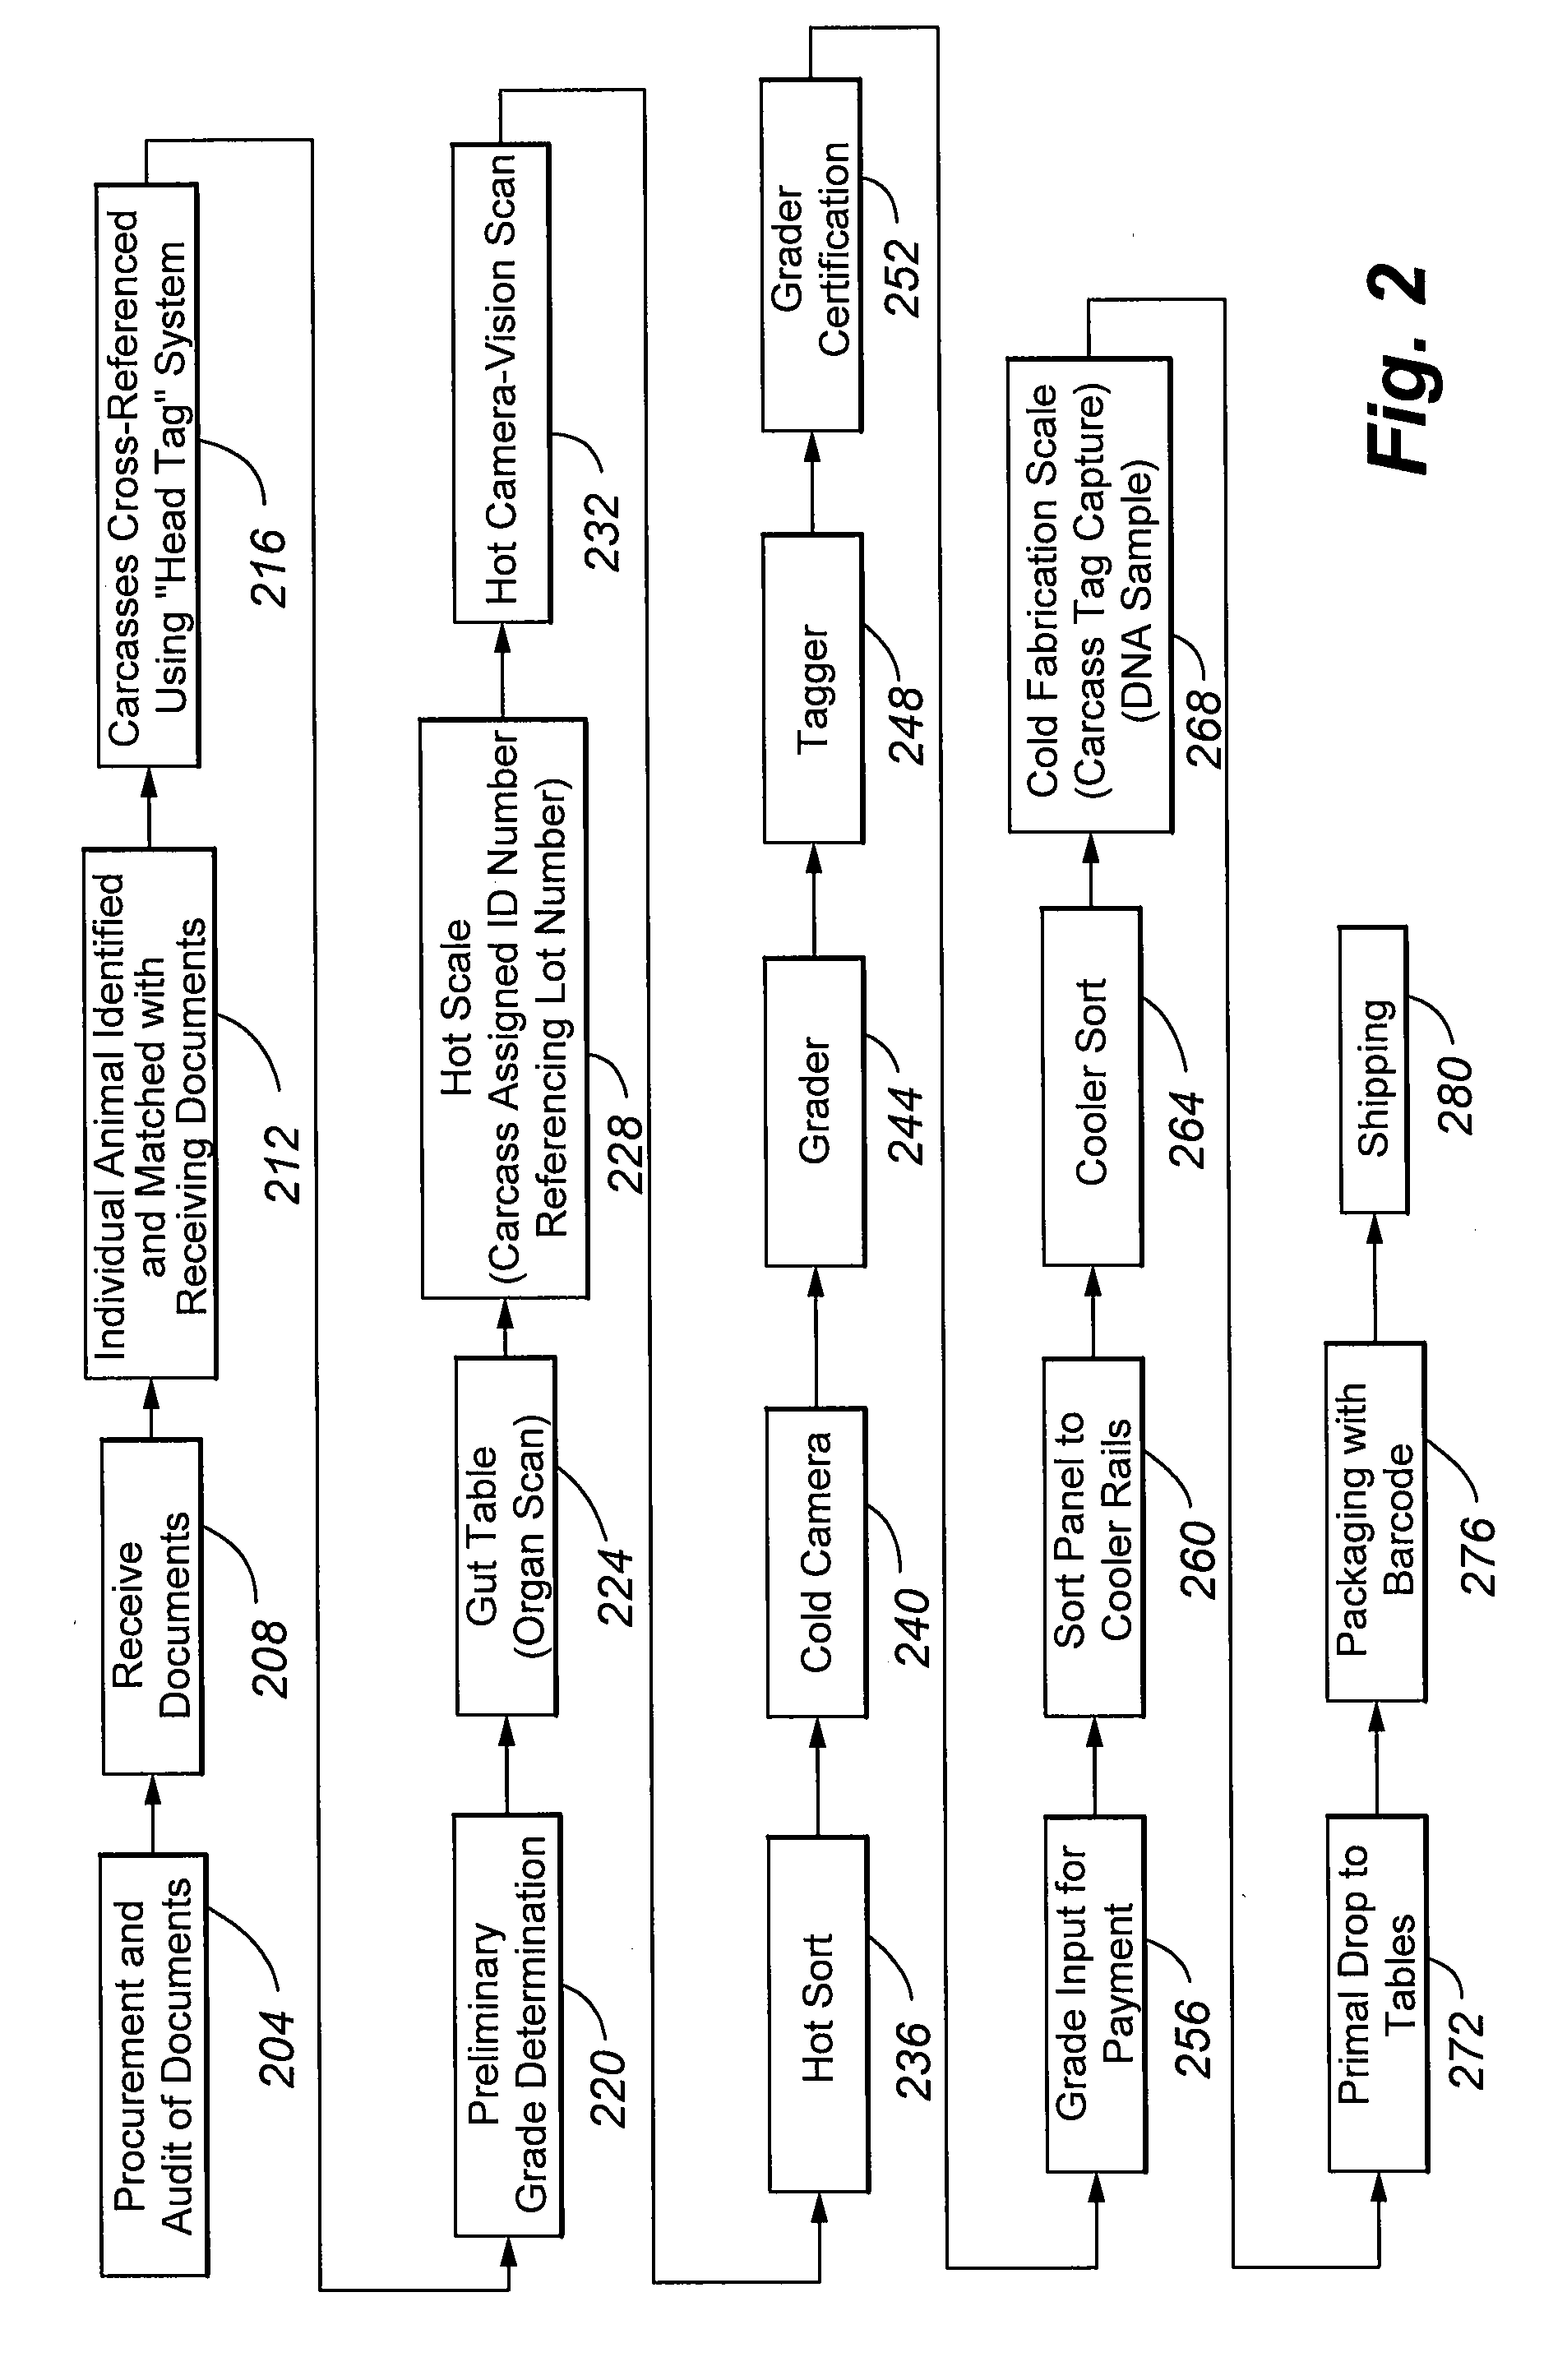 Methods and Systems for Administering a Drug Program